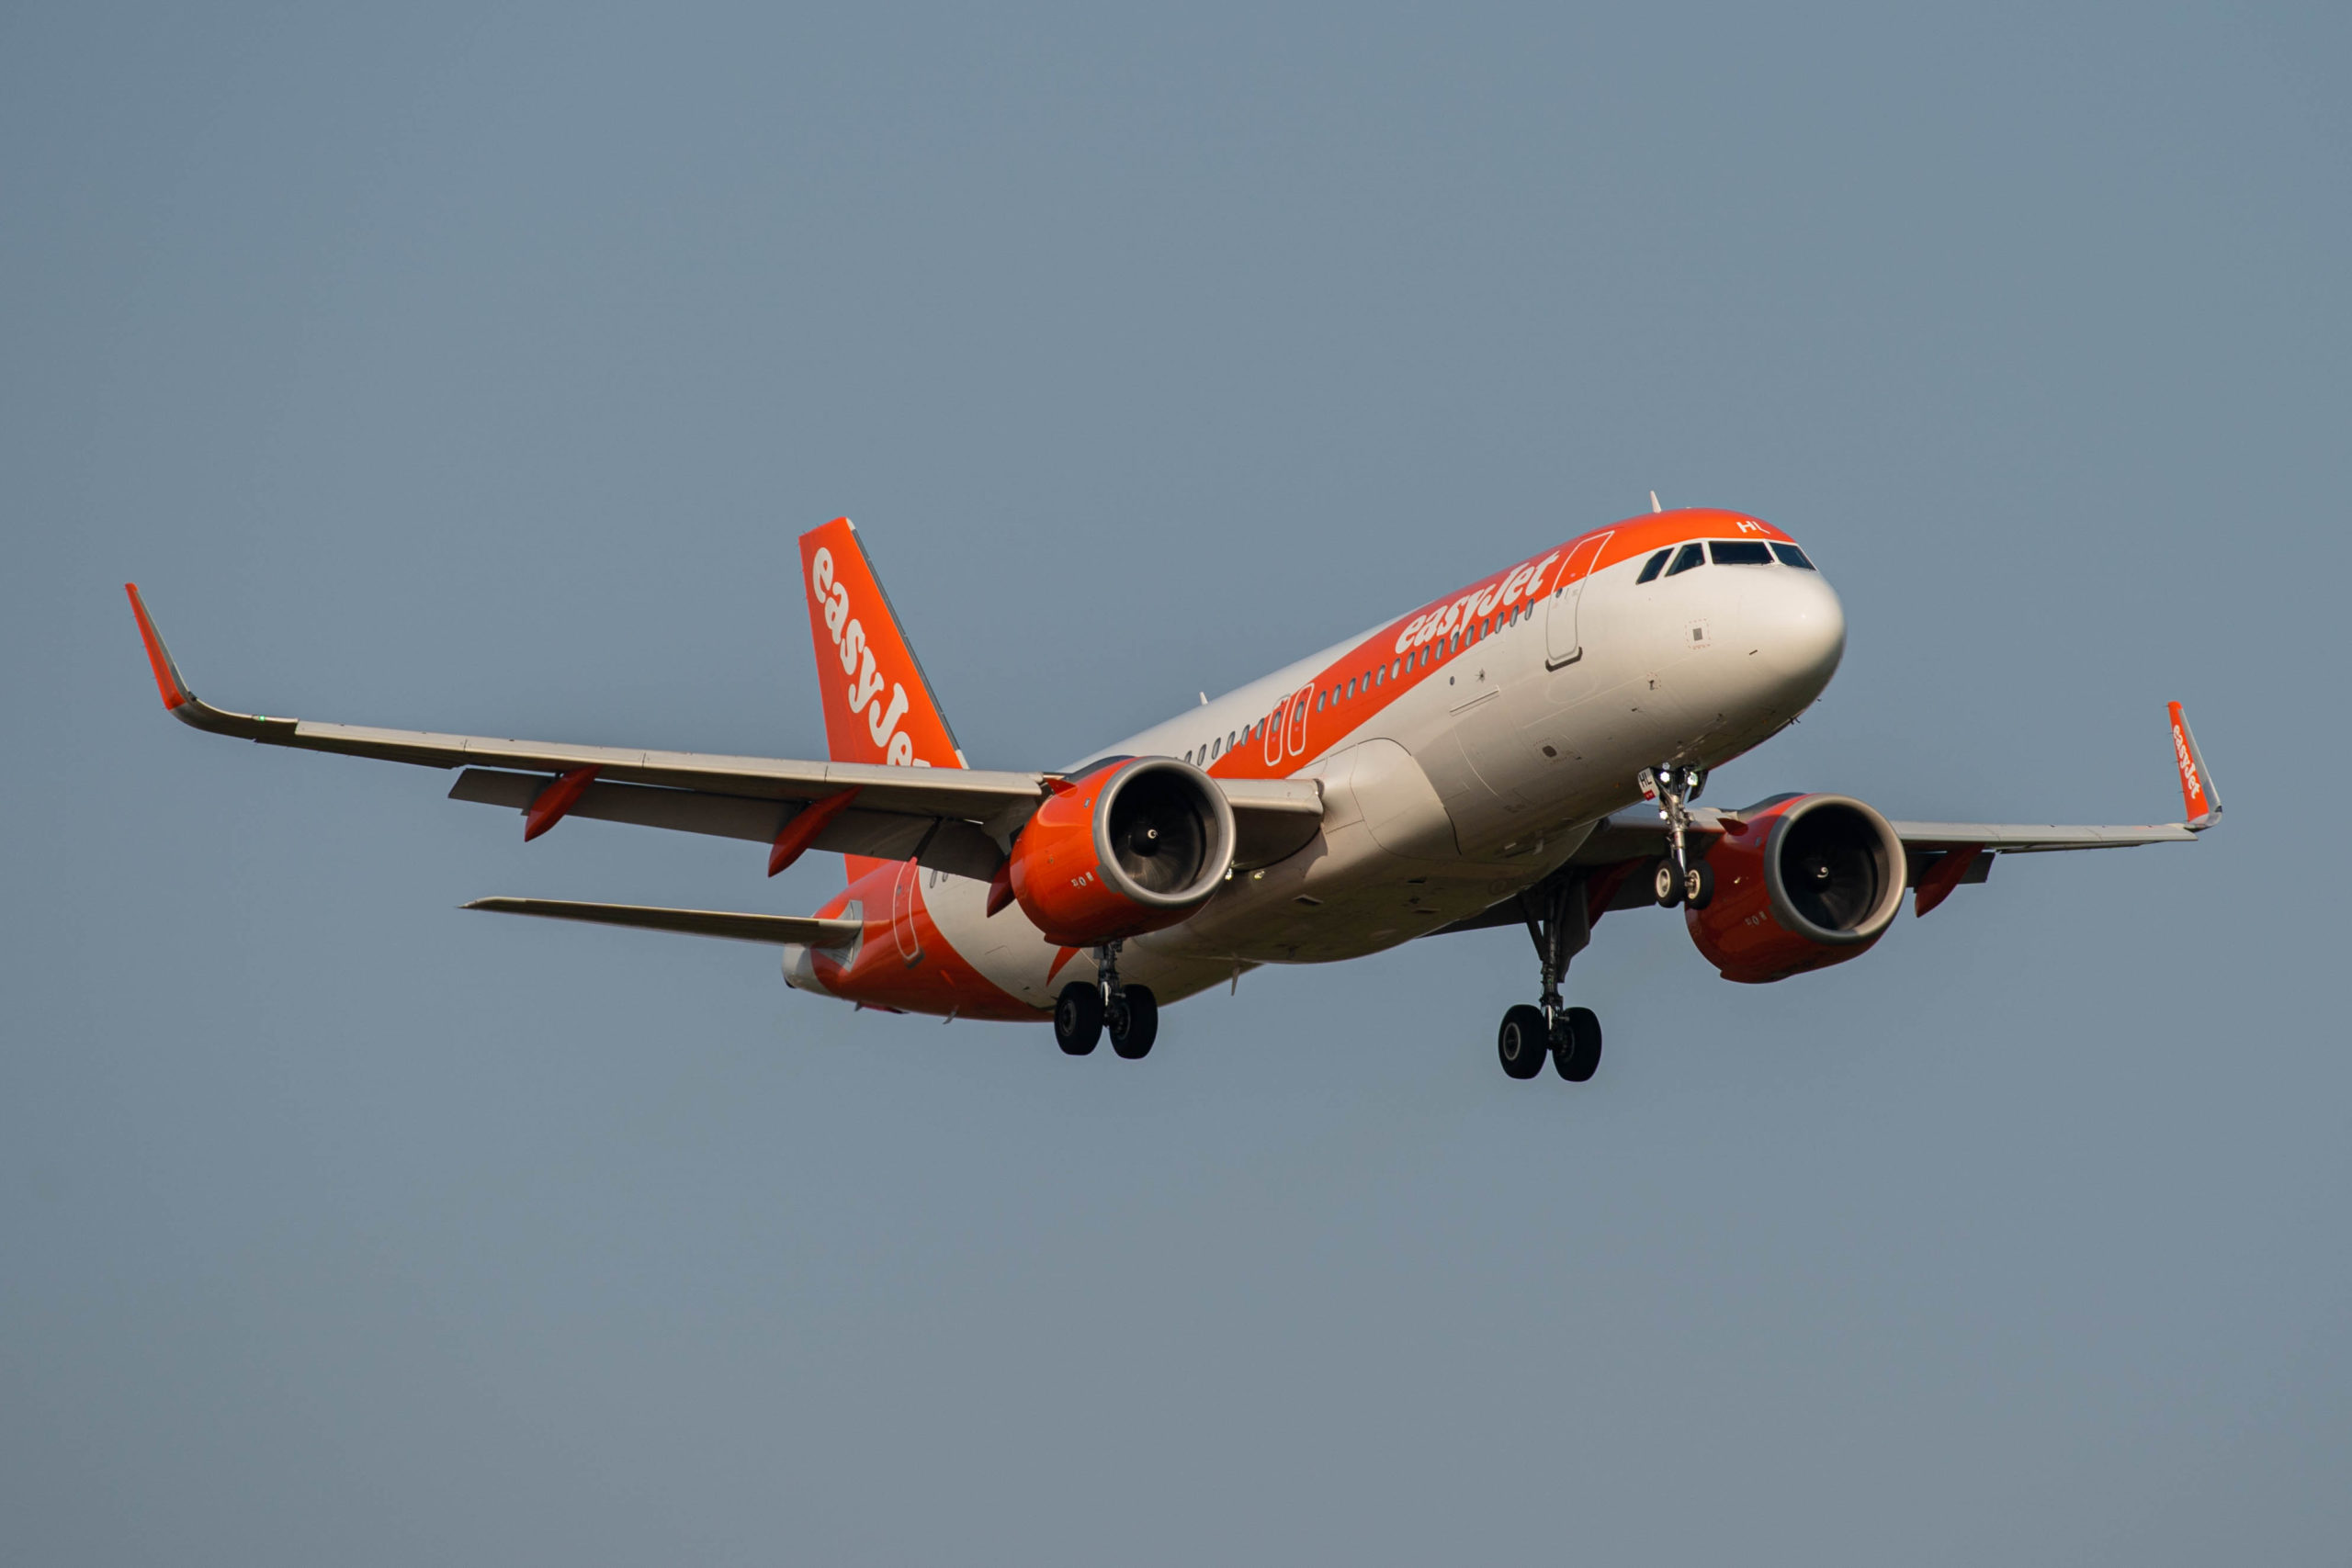 An easyJet A320 approaches to land.